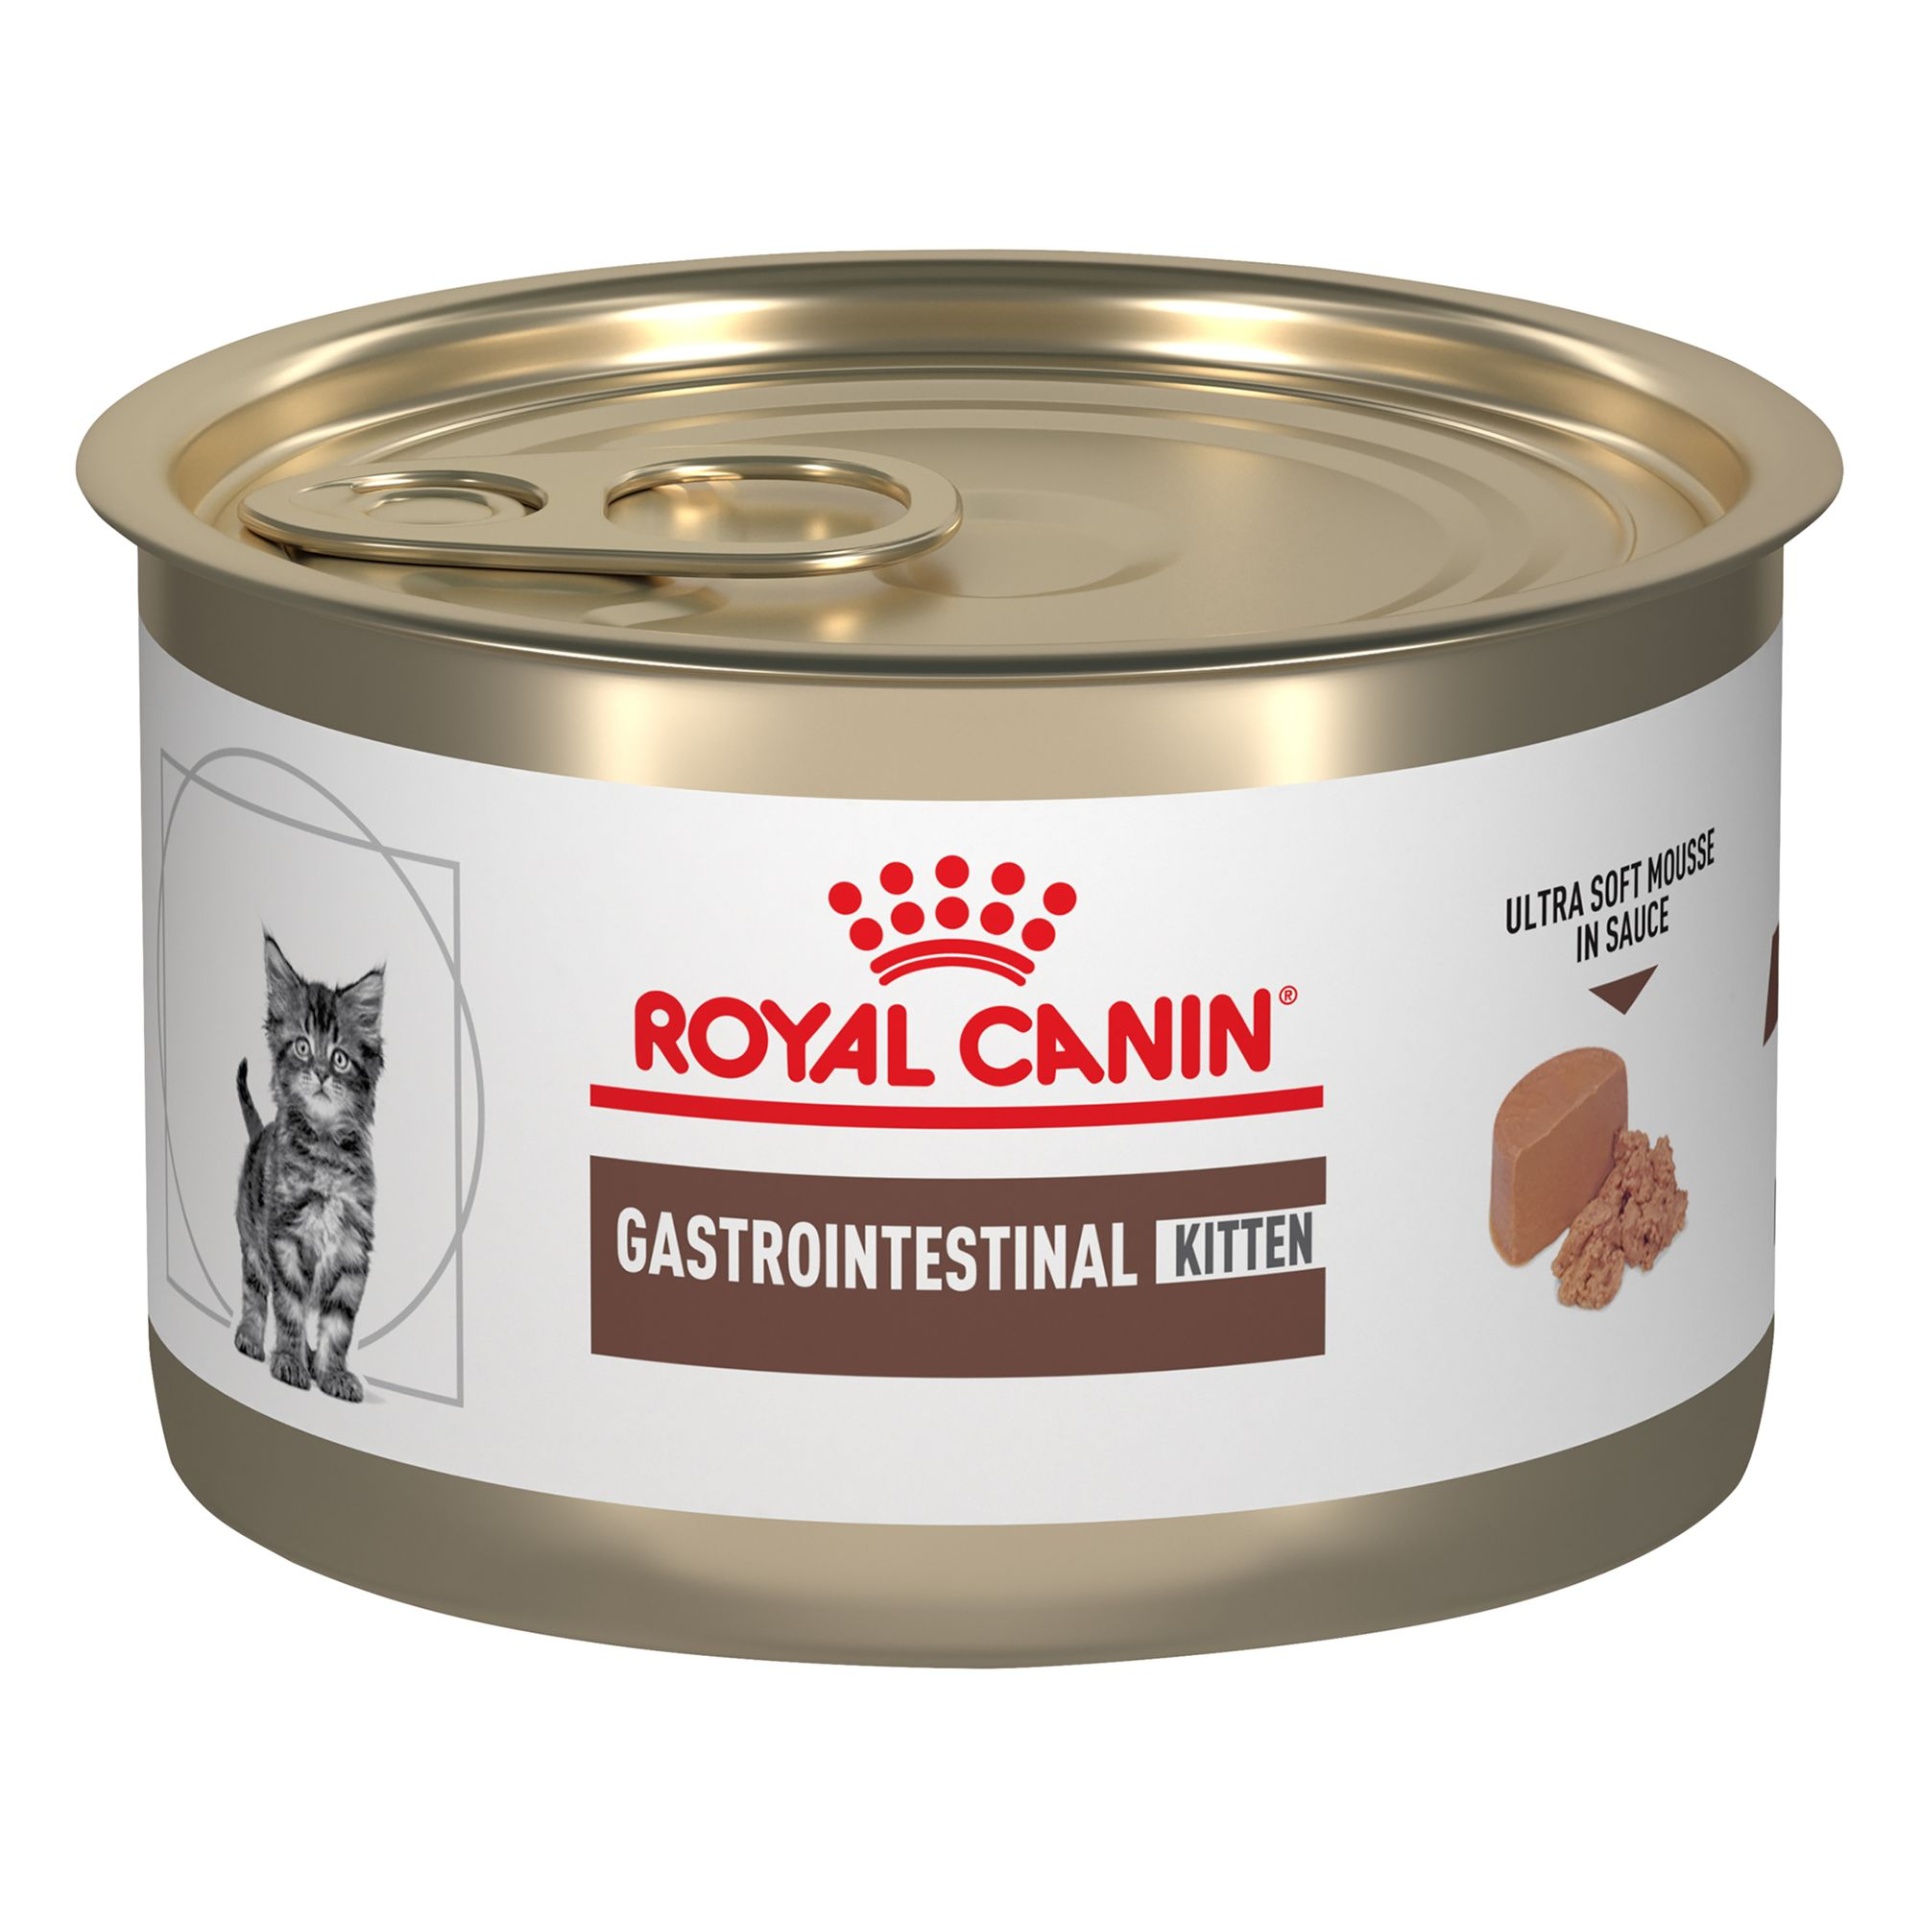 slide 1 of 1, Royal Canin Vet Diet Royal Canin Veterinary Diet Kitten Gastrointestinal Ultra Soft Mousse in Sauce Canned Cat Food, 5.1 oz